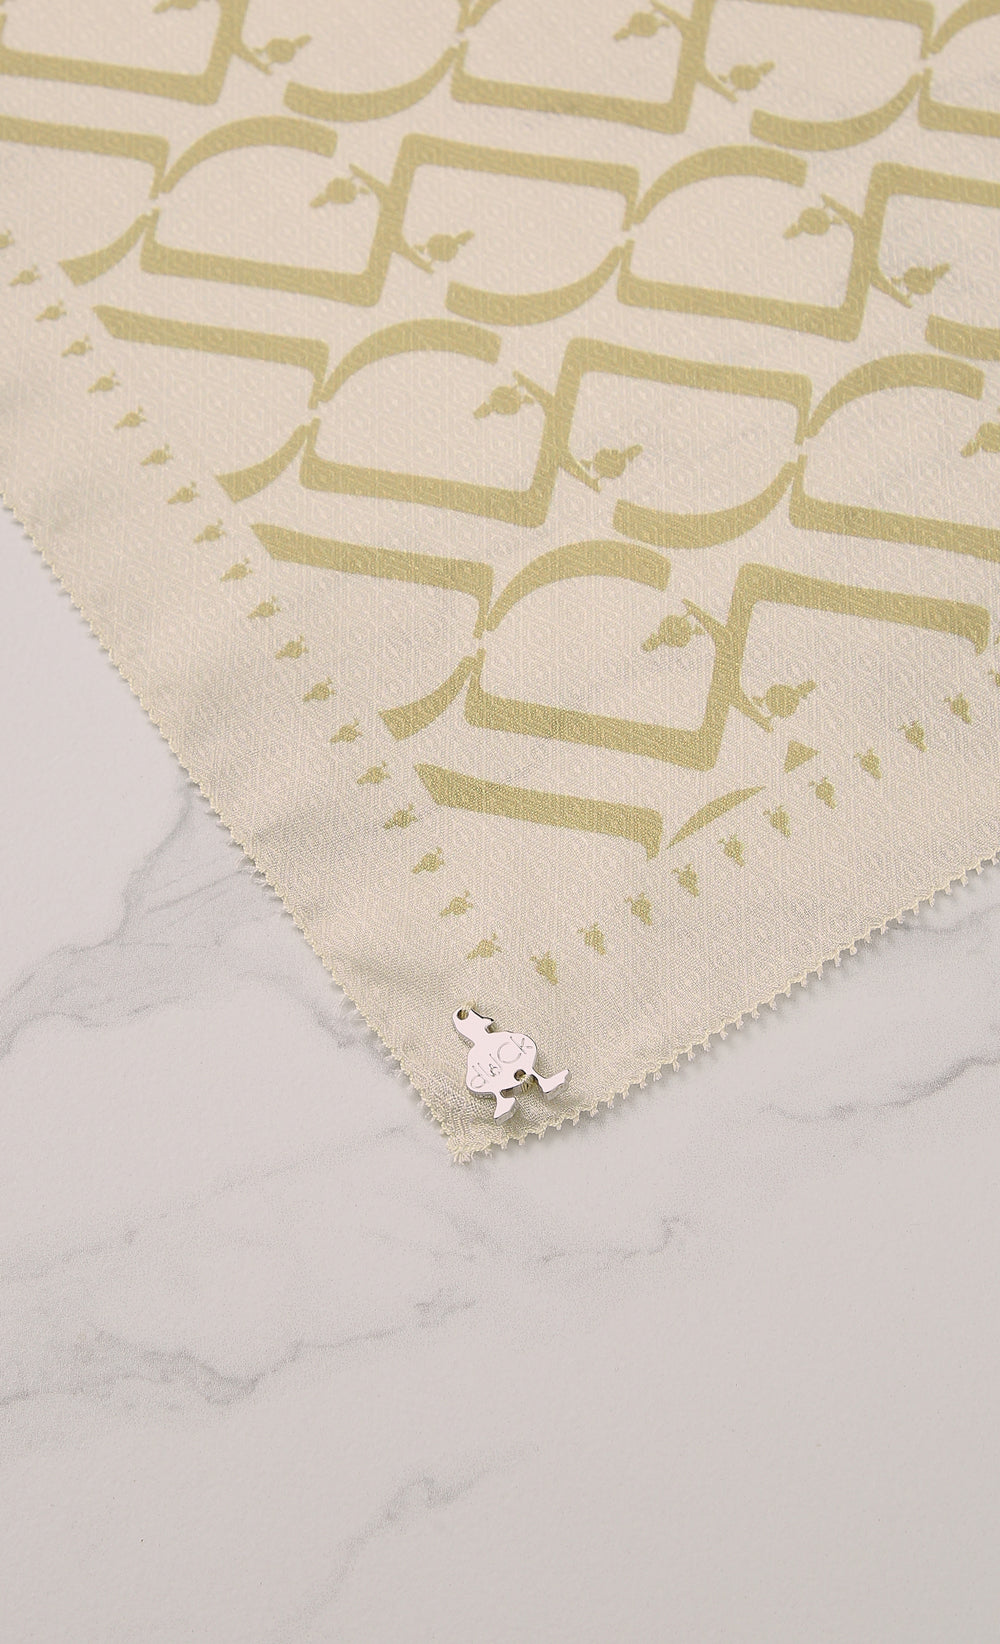 D Monogram dUCk Voile Square Scarf in Earl Grey